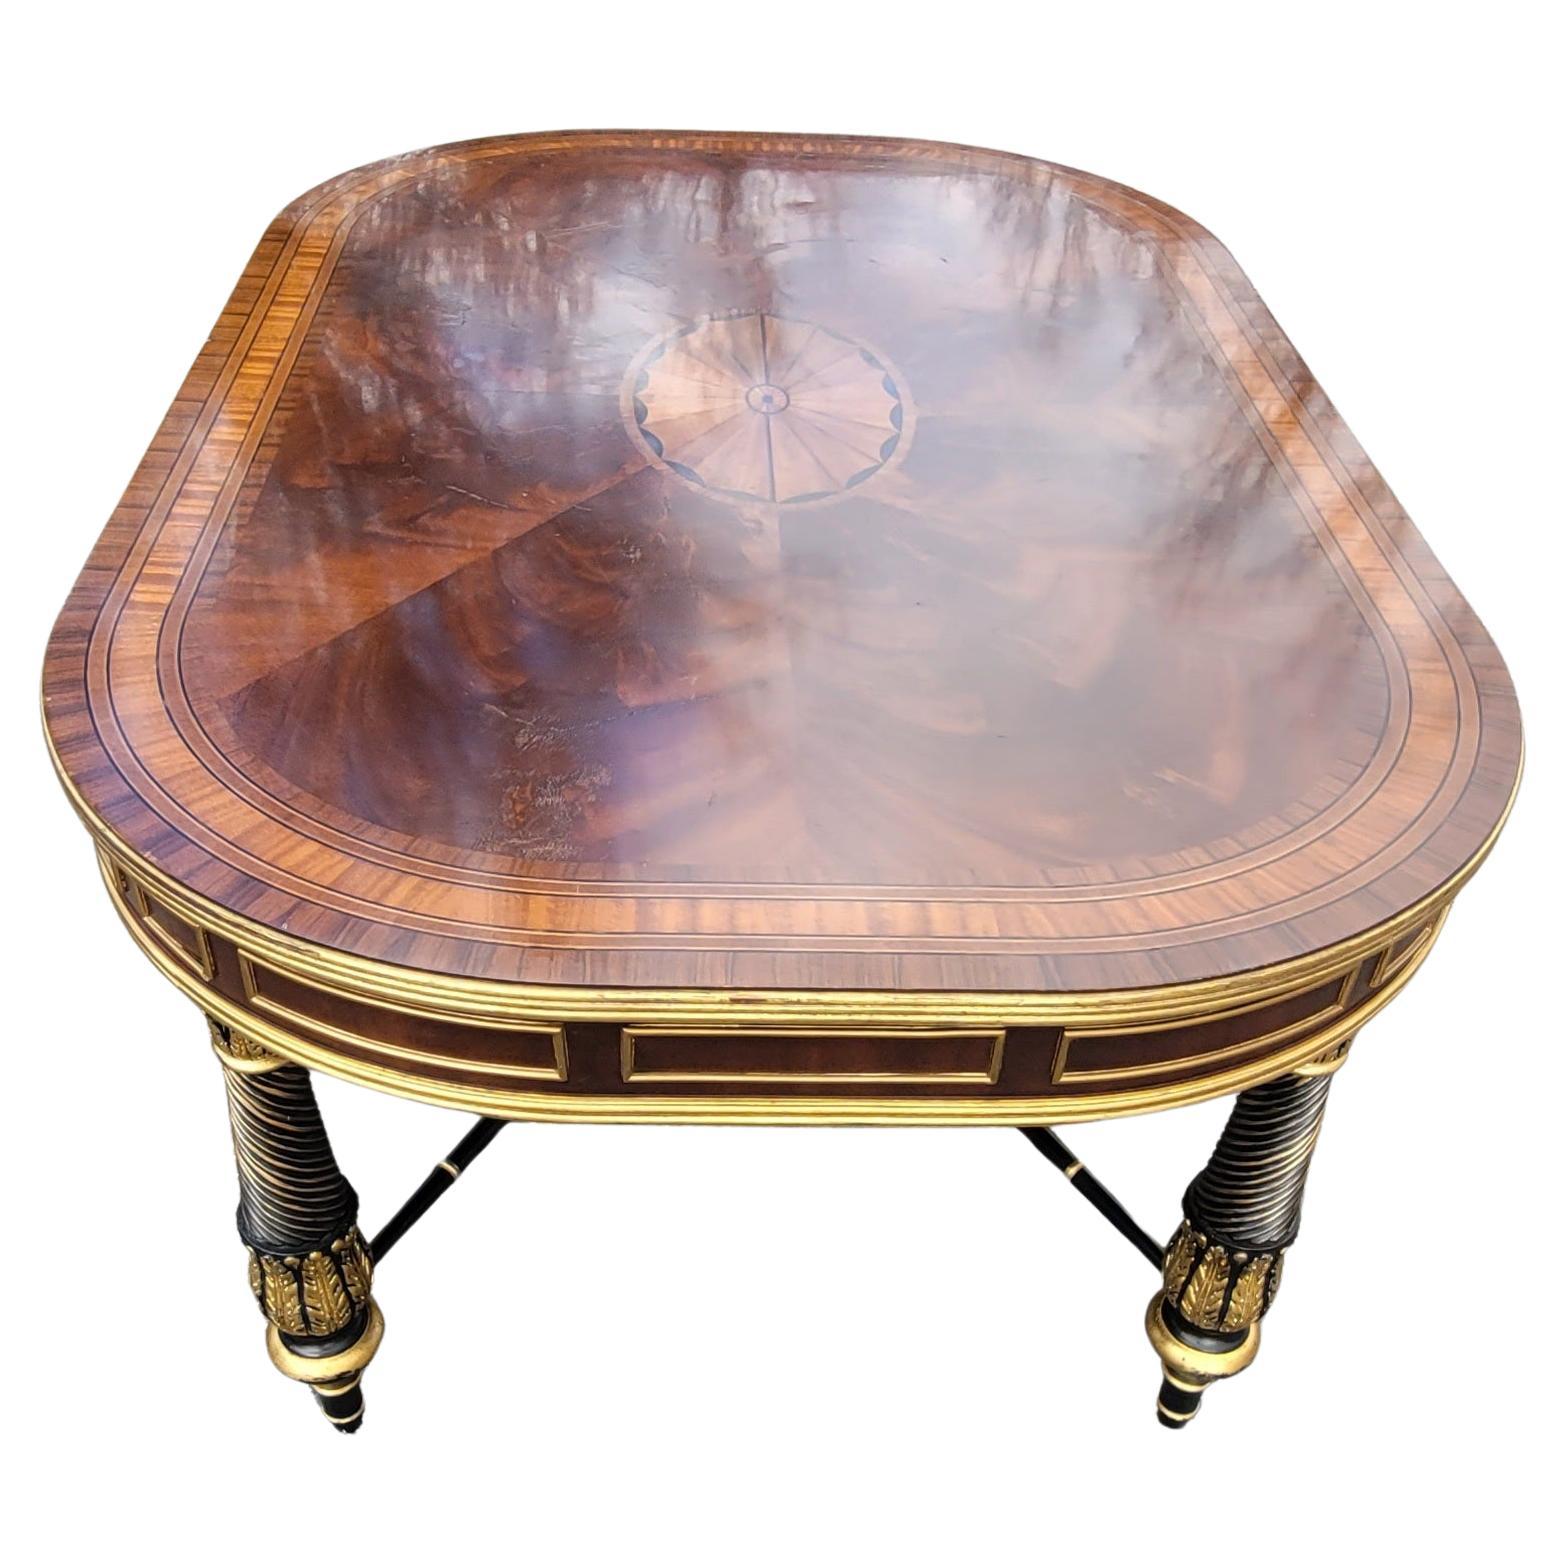 E.J Victor Regency Style Ebonized and Parcel Gilt Marquetry Inlaid Coffee Table 3